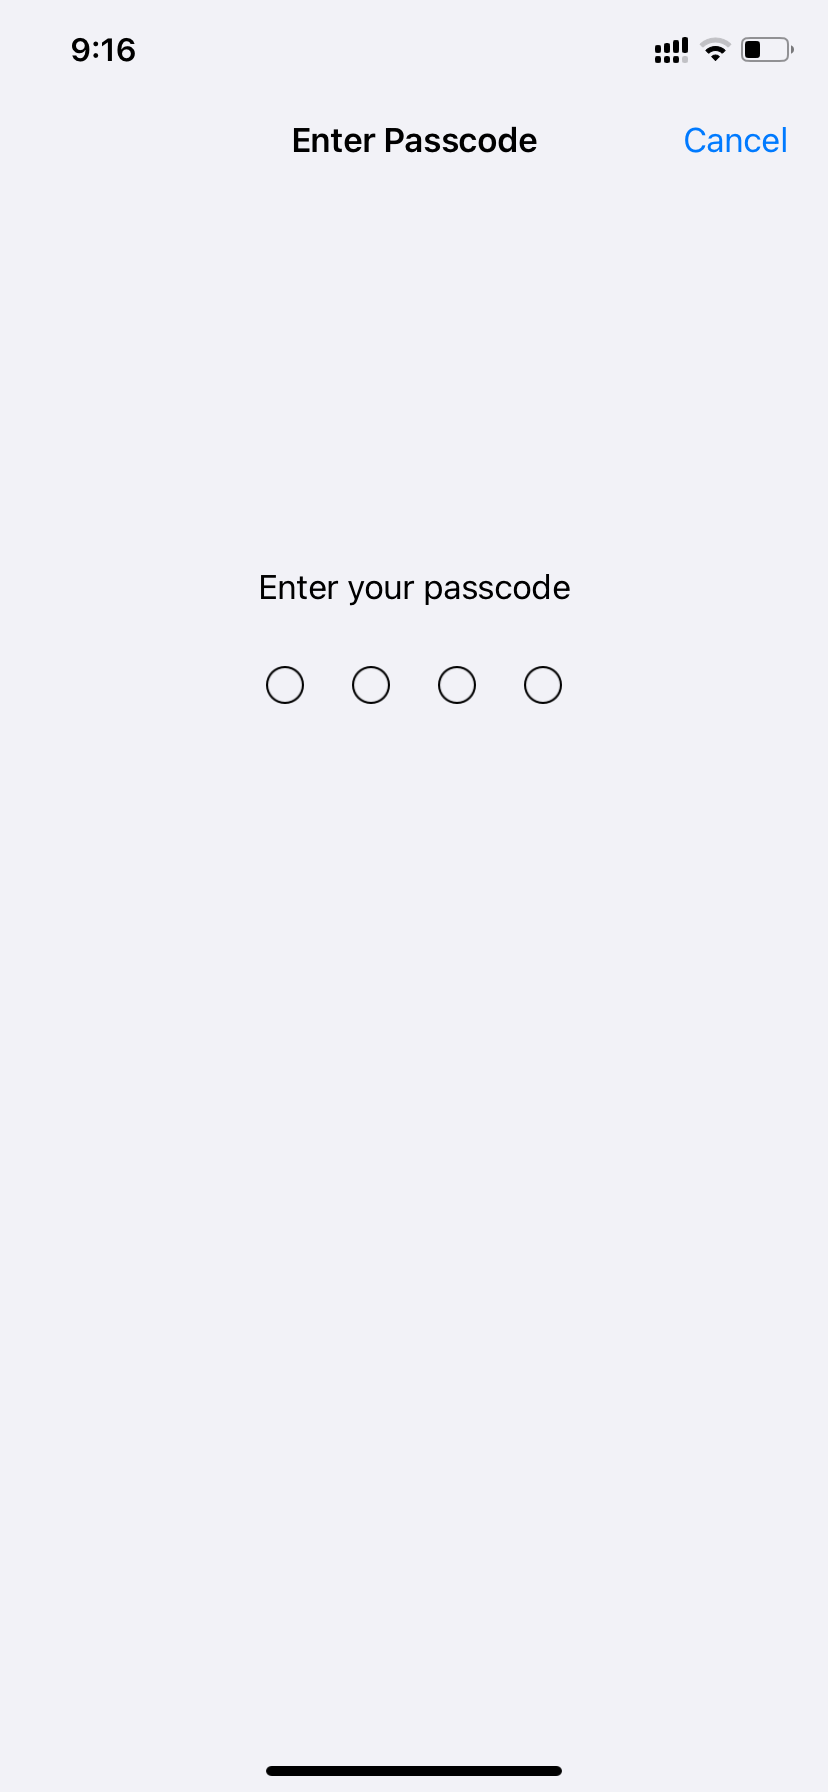 Finally, enter your passcode to confirm.